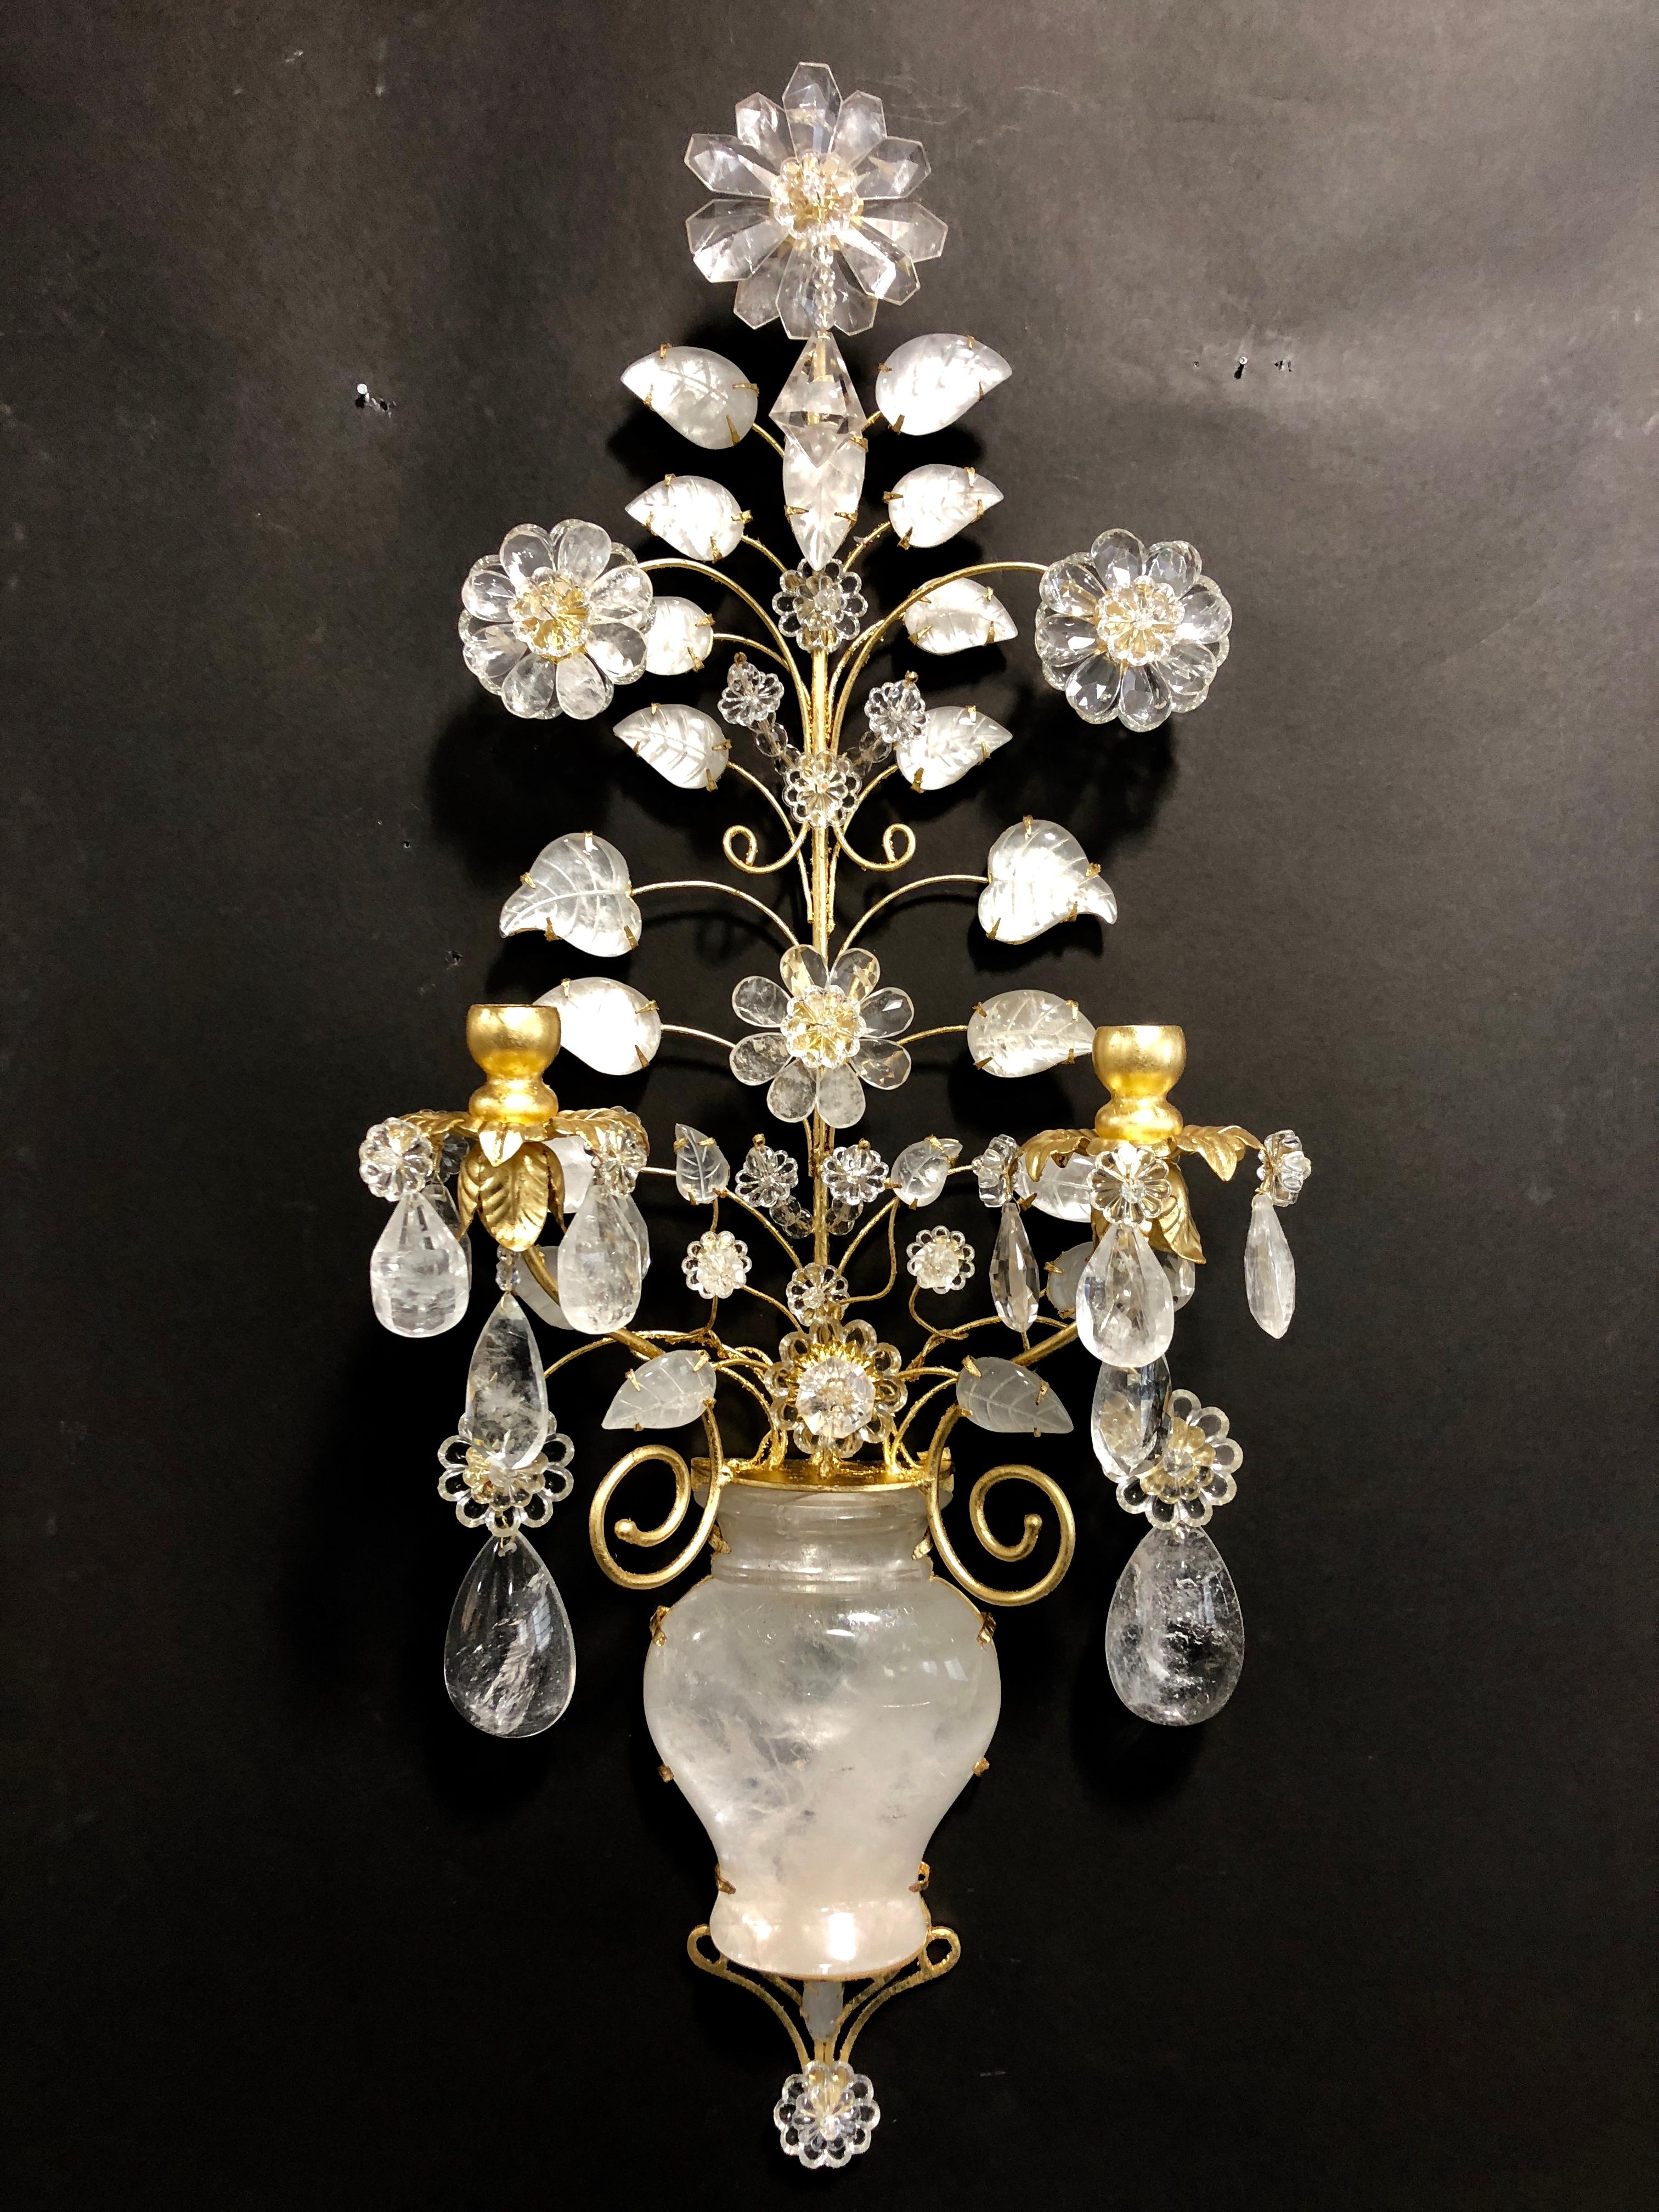 Wonderful modern transitional gold gilt Baguès rock crystal Mid Century sconces
Measures: H 29.5”, W 12”, D 6”.
Currently not wired
We can have them done for an additional charge of $500.